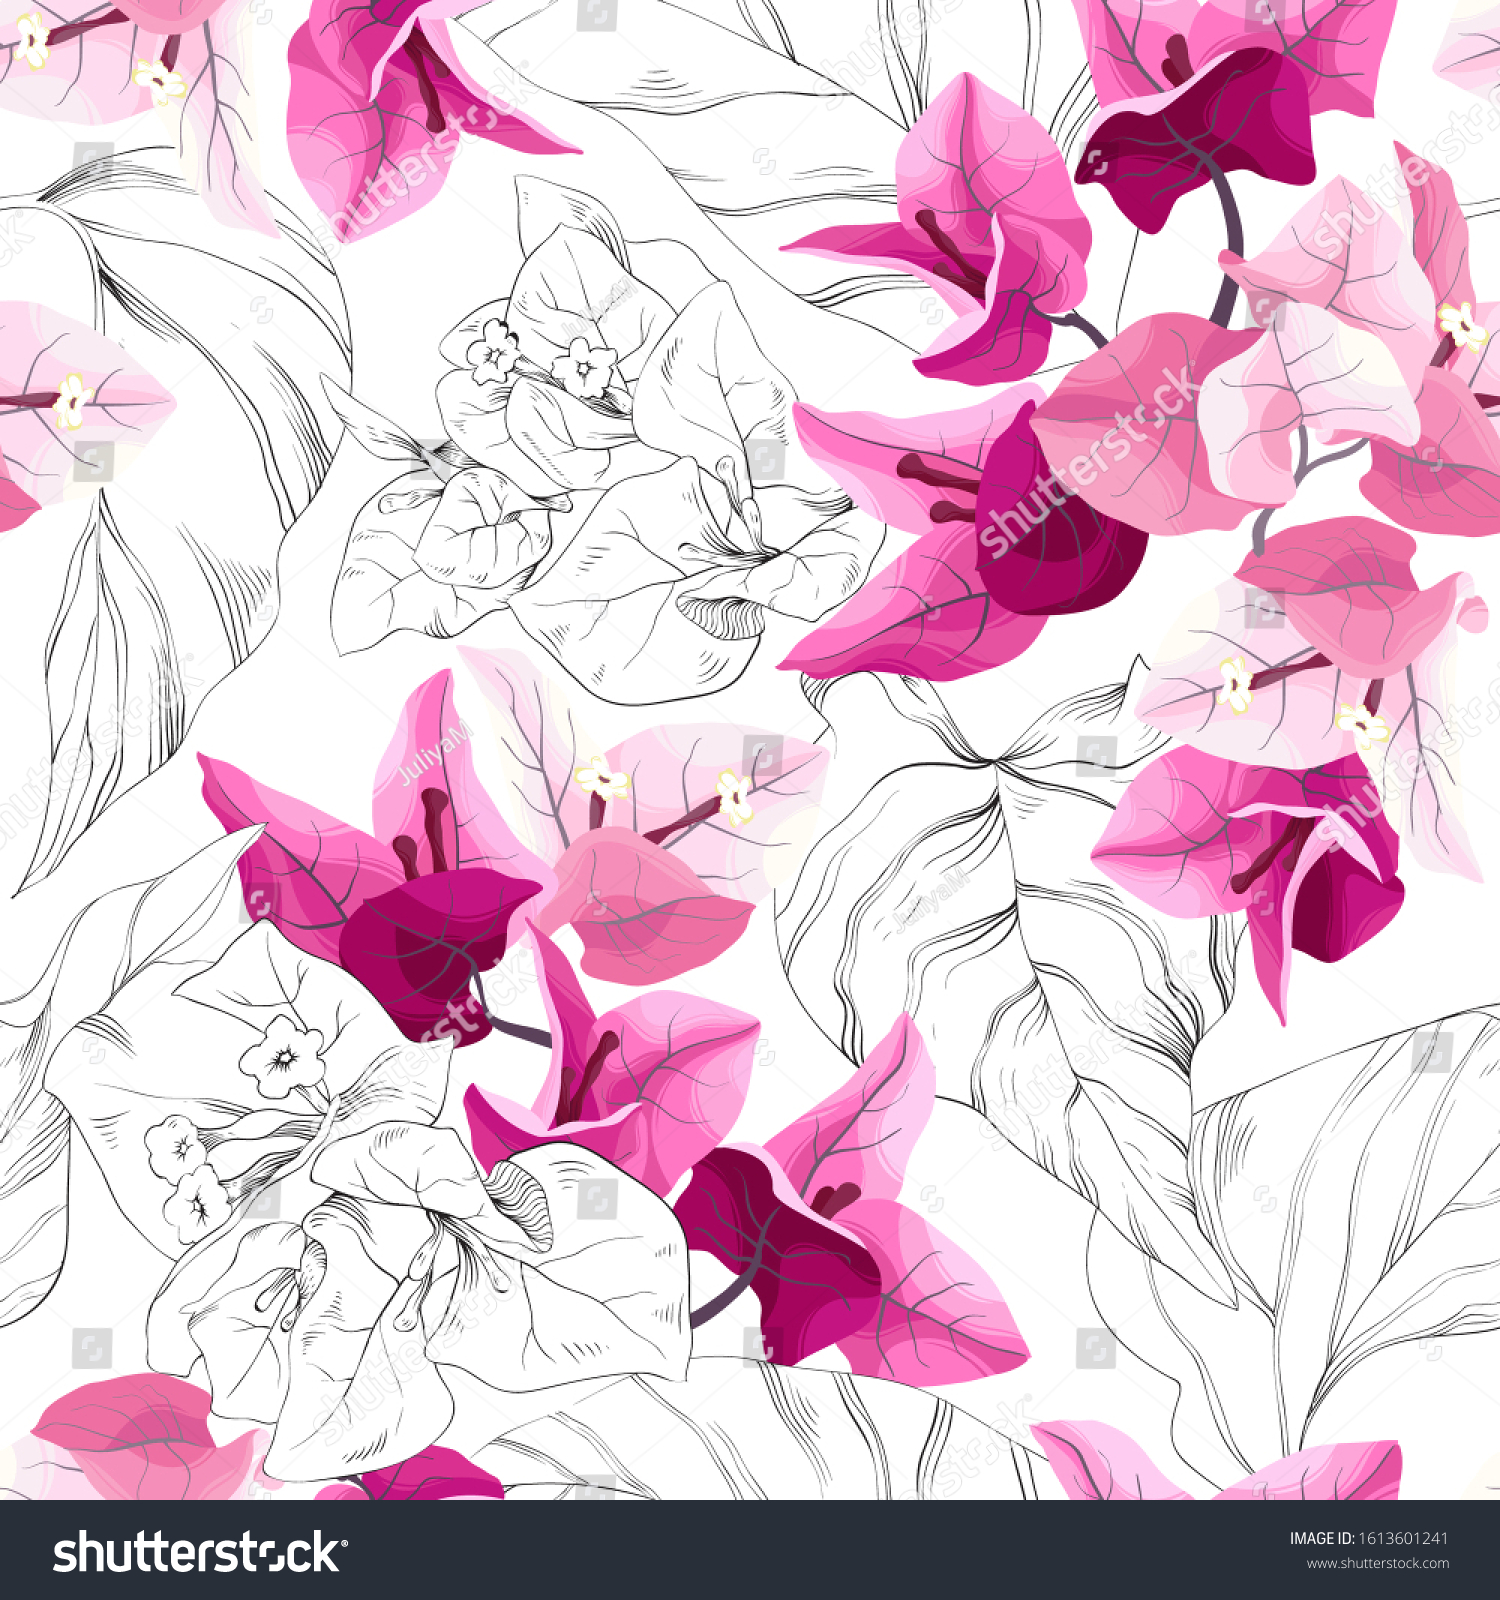 SVG of Vector tropical seamless pattern with bougainvillea. Exotic floral background design. svg